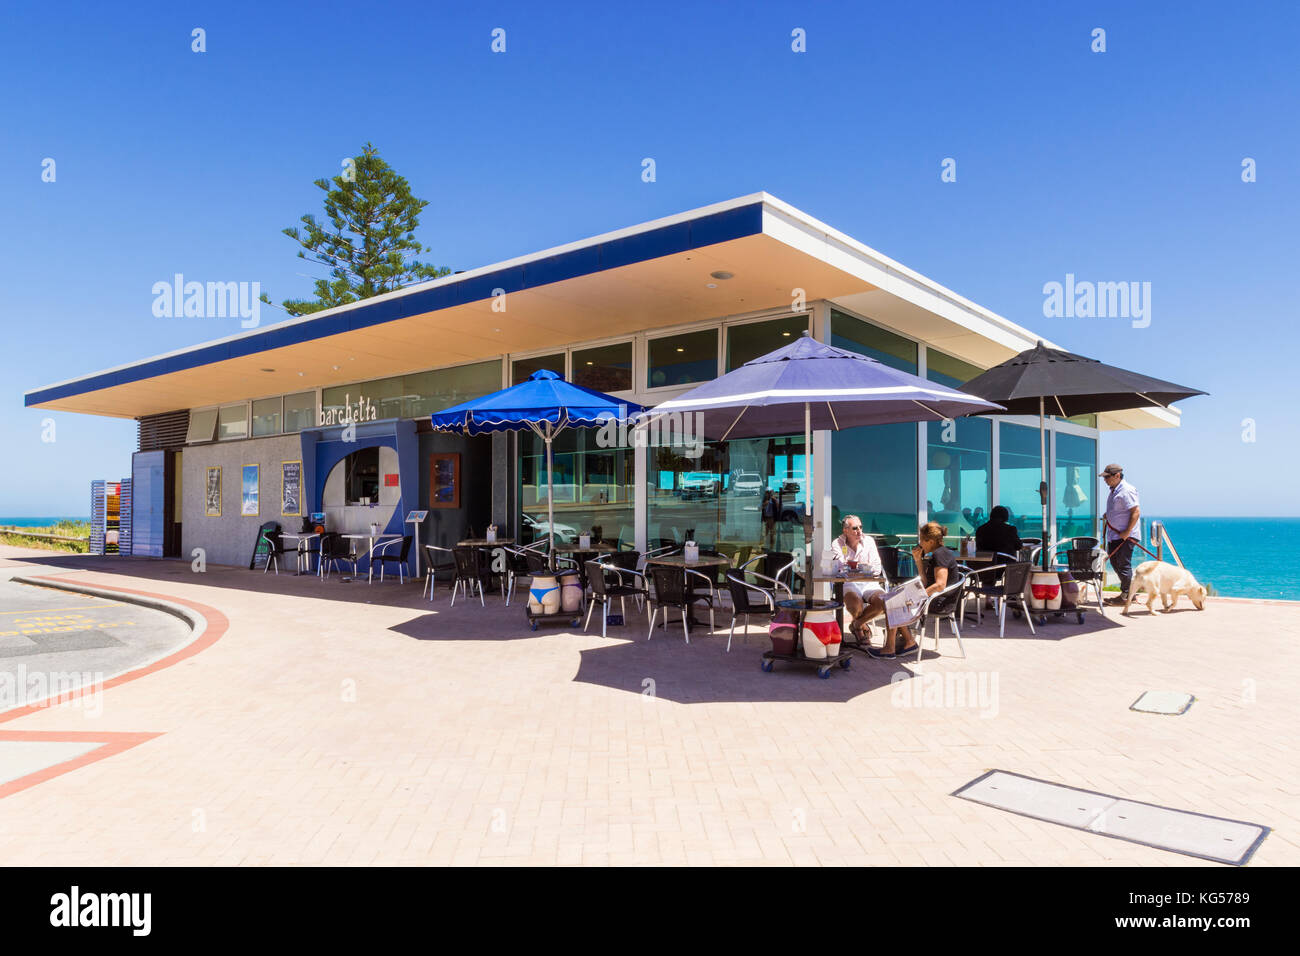 Iconic Cottesloe Beach restaurant Barchetta with sea views over the Indian Ocean off the Western Australia coast Stock Photo